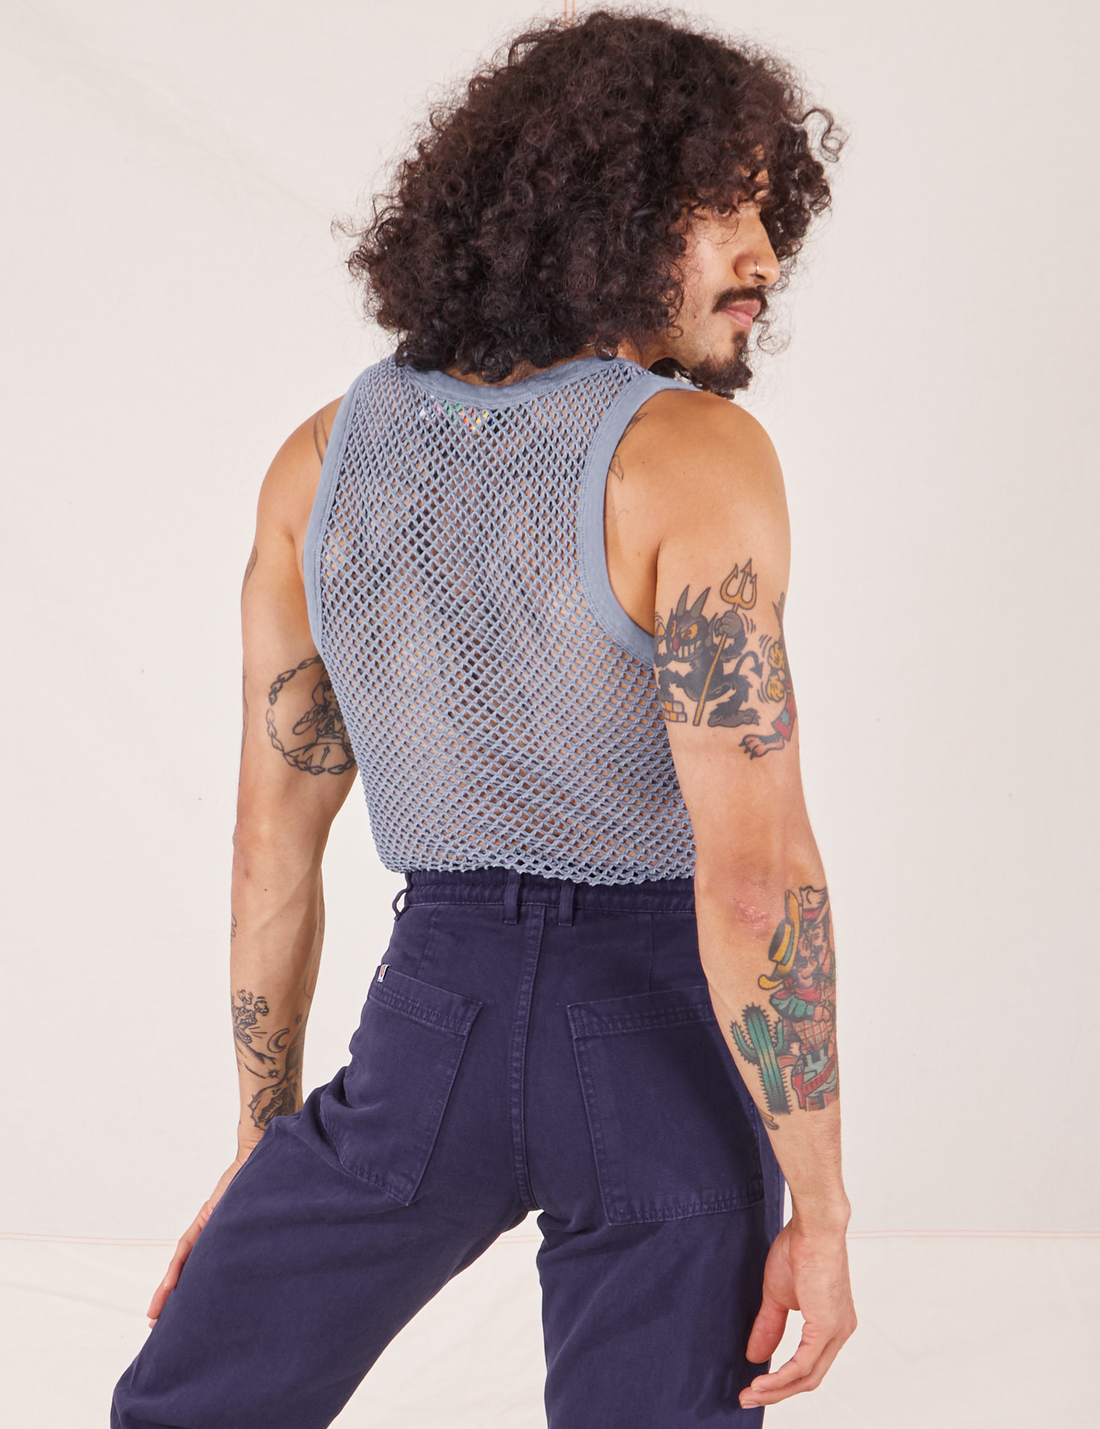 Back view of Mesh Tank Top in Periwinkle and navy Western Pants worn by Jesse